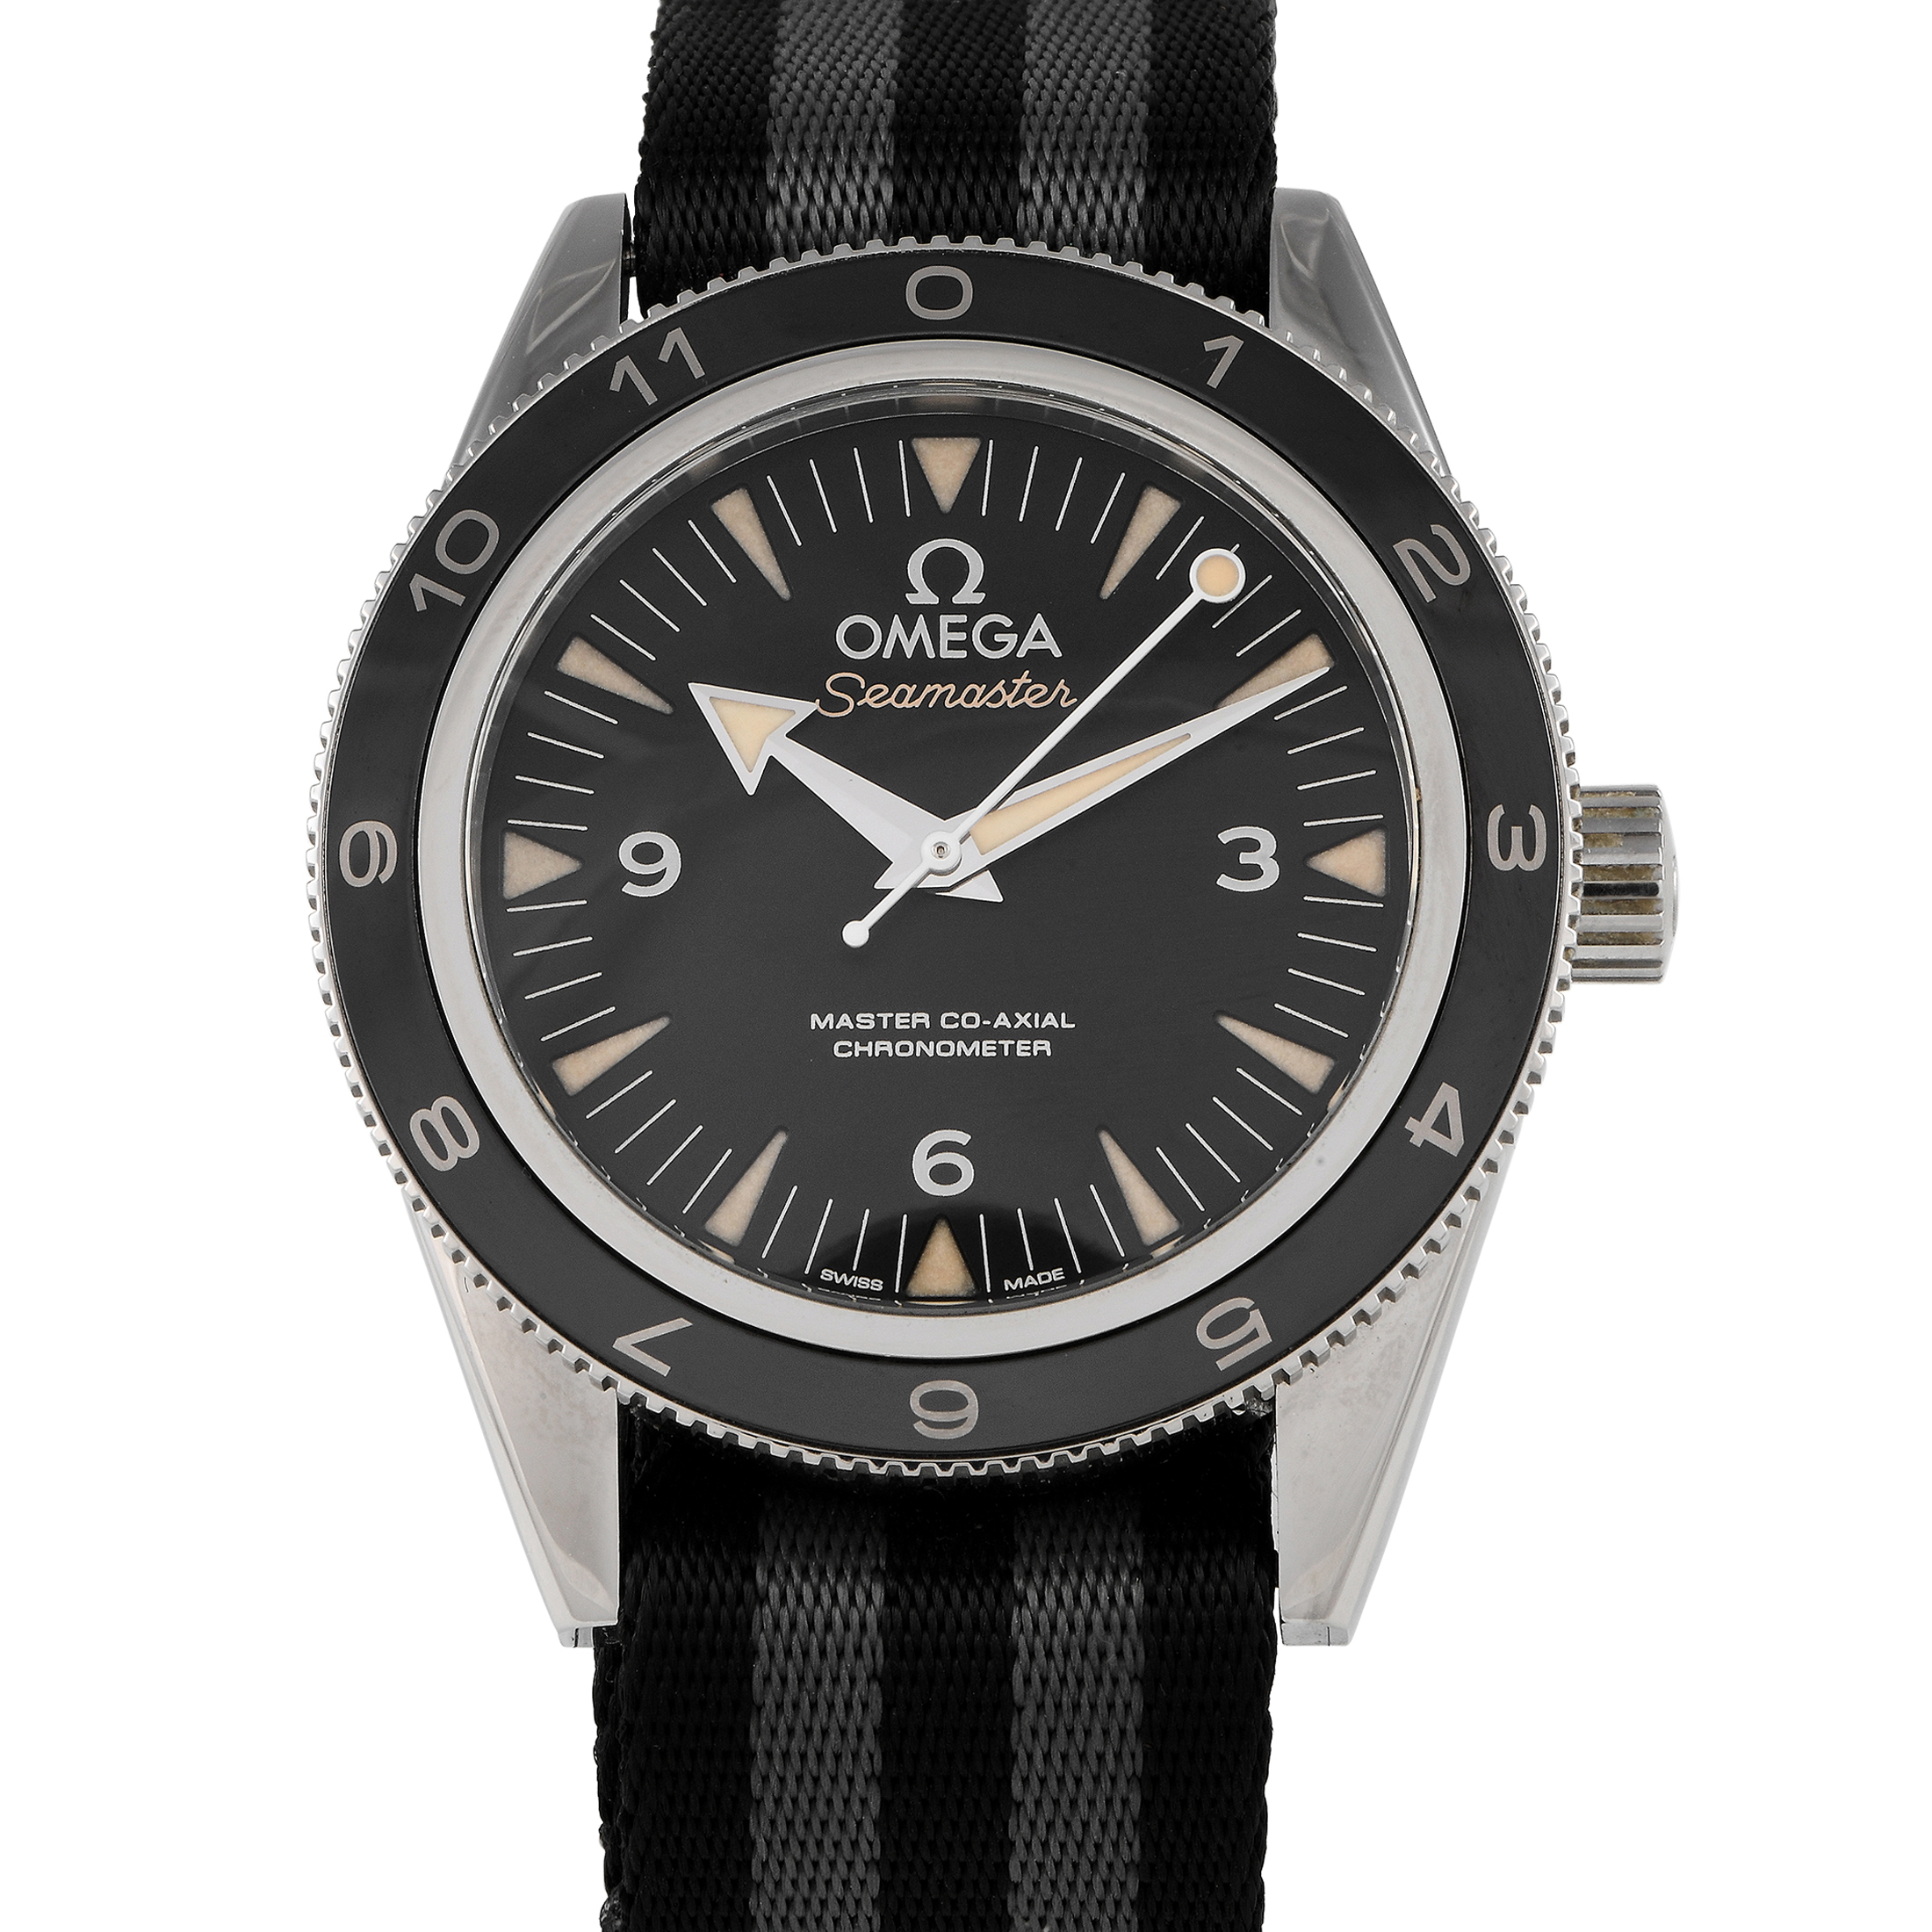 Omega Seamaster 300 SPECTRE Limited Edition Watch 233.32.41.21.01.001